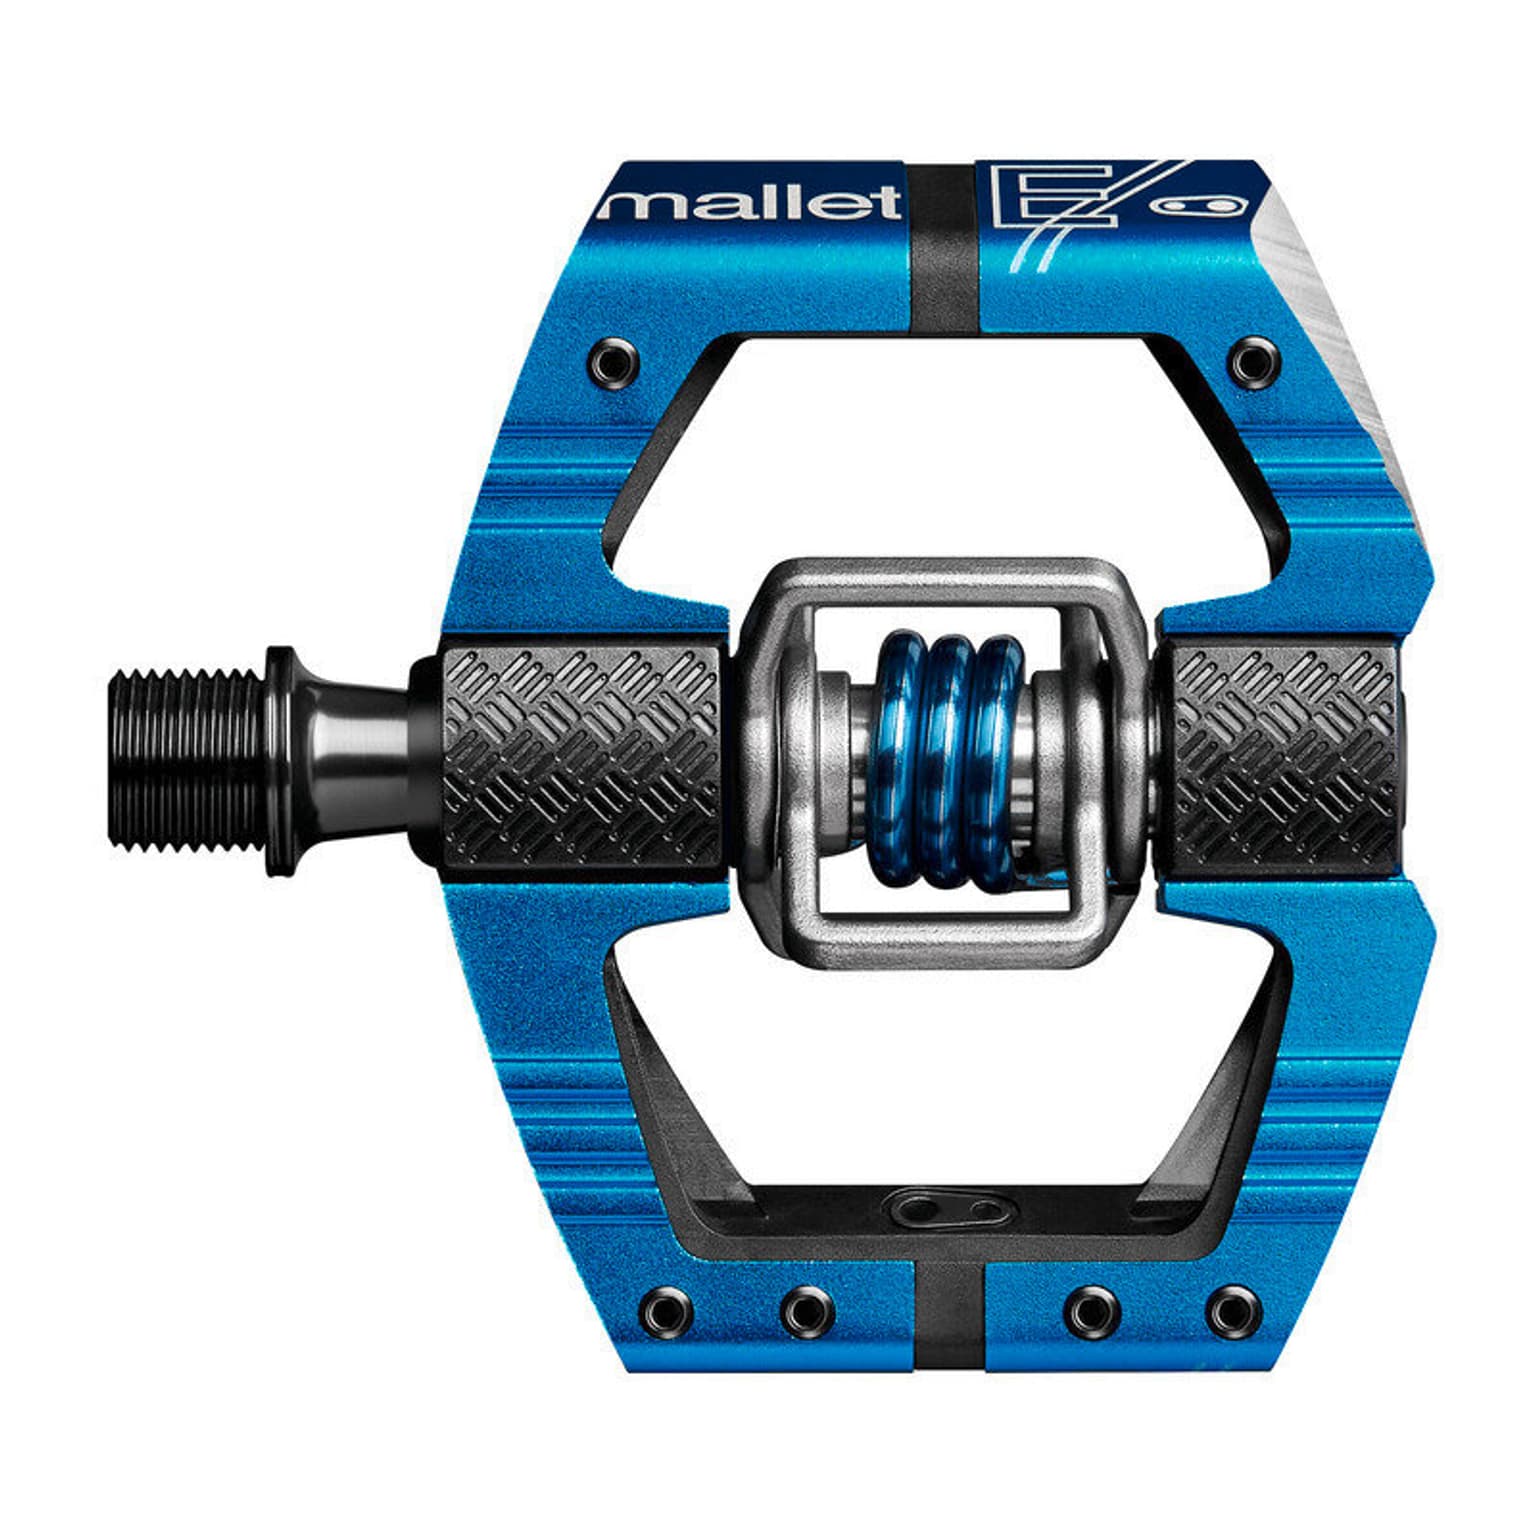 crankbrothers crankbrothers Pedal Mallet Enduro Pedale 1